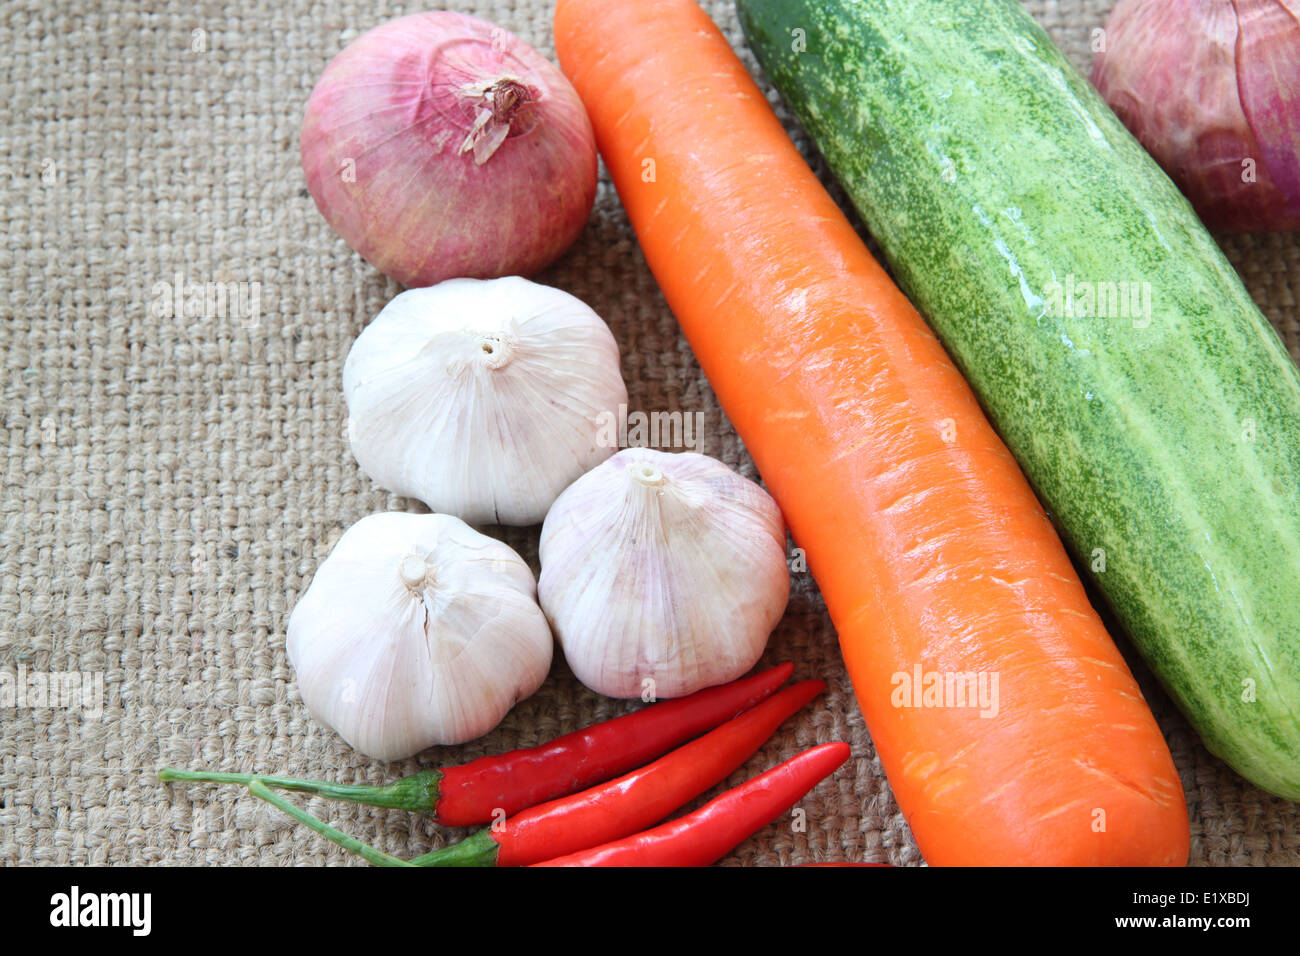 vegetable of ingredient for cooking. Stock Photo